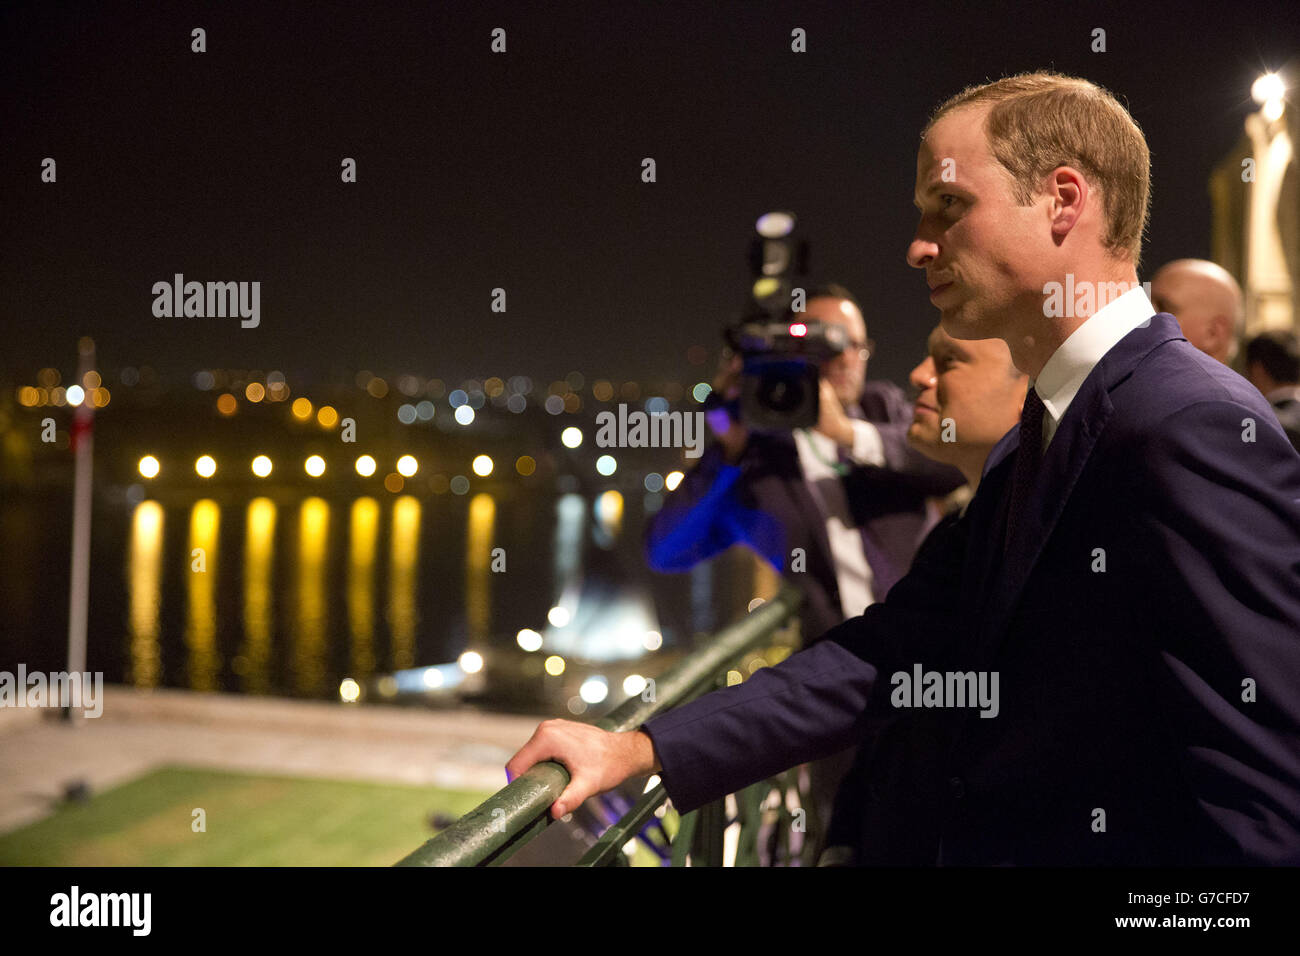 Maltese Prime Minister Joseph Muscat watches fireworks with the Duke of Cambridge (right) at the Upper Barrakka Gardens, in Valletta, Malta, during an evening celebration marking the 50th anniversary of Malta's independence. Stock Photo